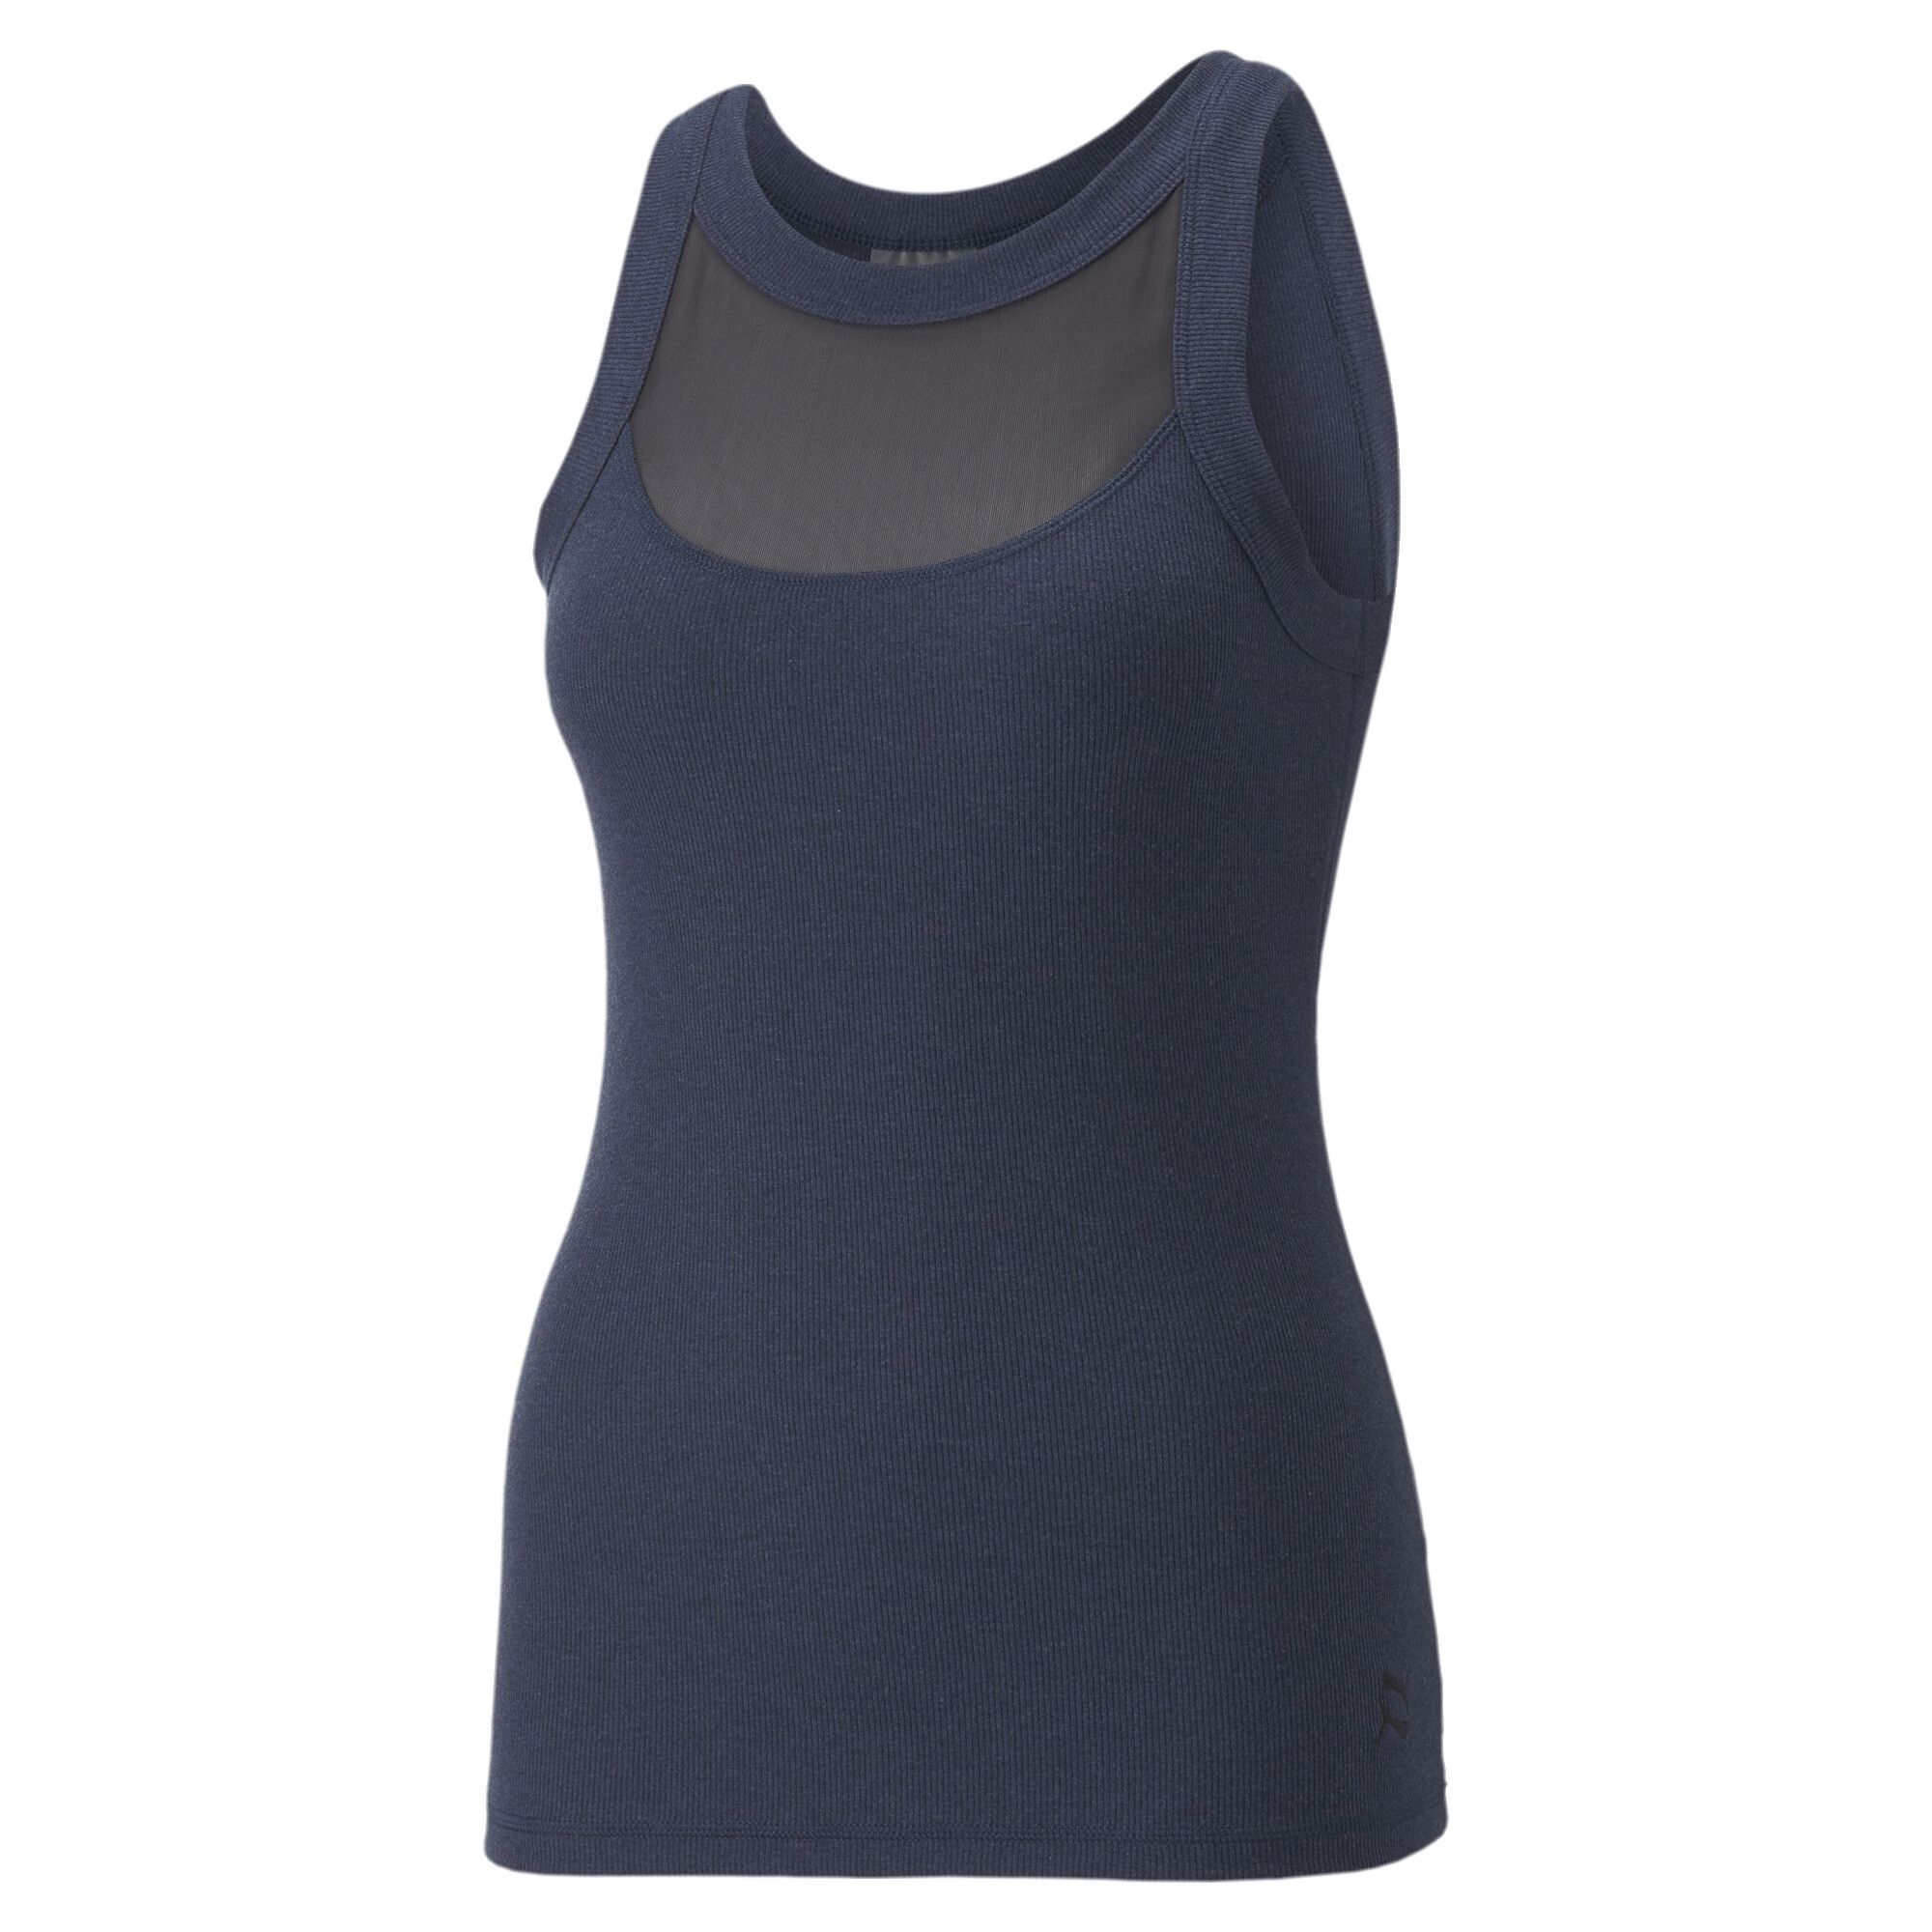 PRODUCT STORY :Layer up your studio look with this premium-quality tank top from PUMA's Exhale collection. Slip it on under a zip or over a sports bra for a look that's as multi-dimensional as your practice. Featuring recycled fabrics and practical power mesh, it looks good, feels good, and does good, too. FEATURES & BENEFITS :Recycled Content: Made with at least 20% recycled material as a step toward a better future. DETAILS :Premium recycled materials.Recycled power mesh insert.Embroidered shine yin yang cat sign off.